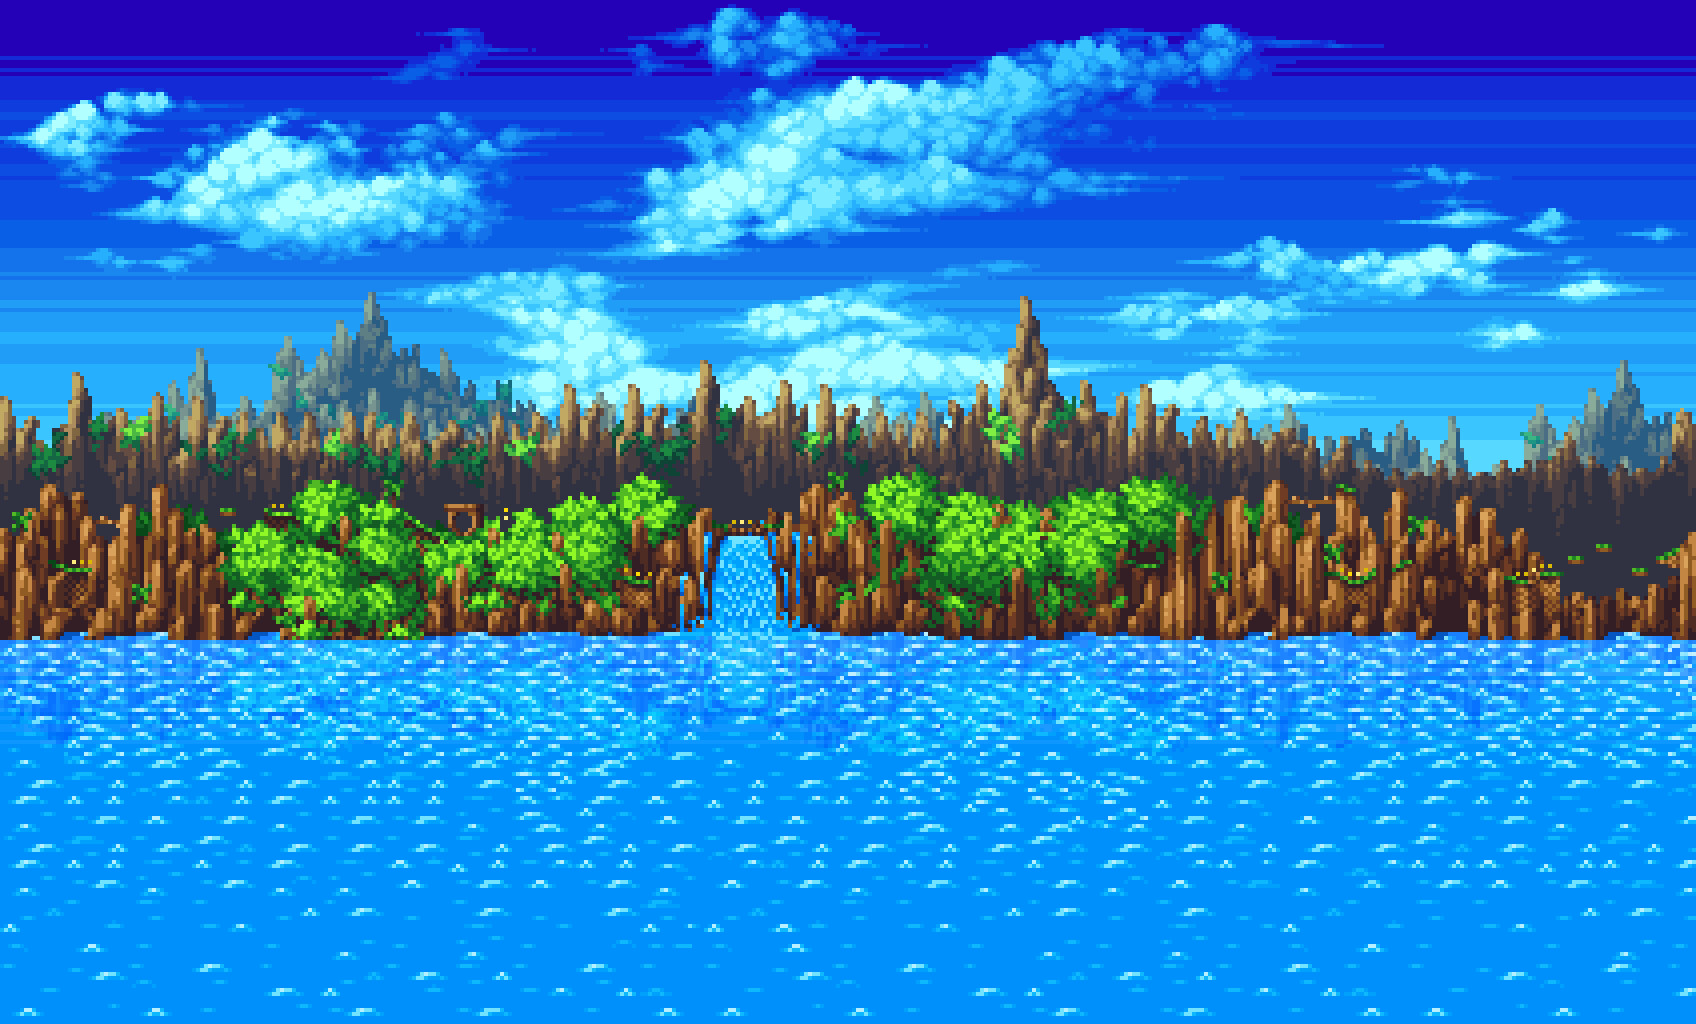 Green Hill Zone Background